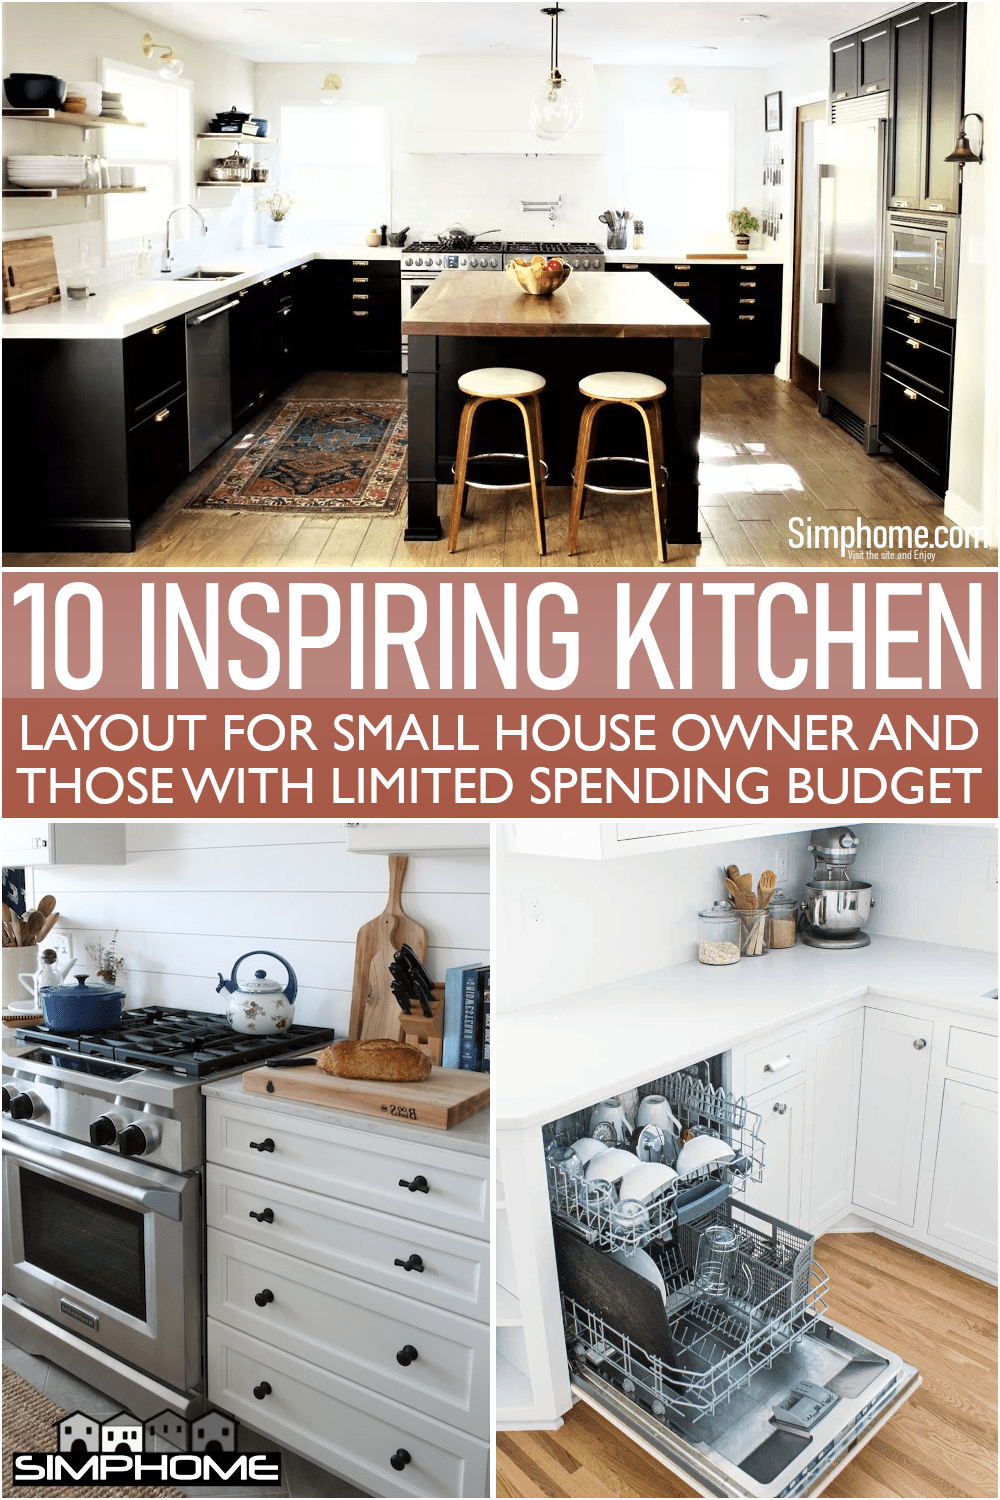 This is ready to copy 10 Kitchen Layouts for Small House Owners